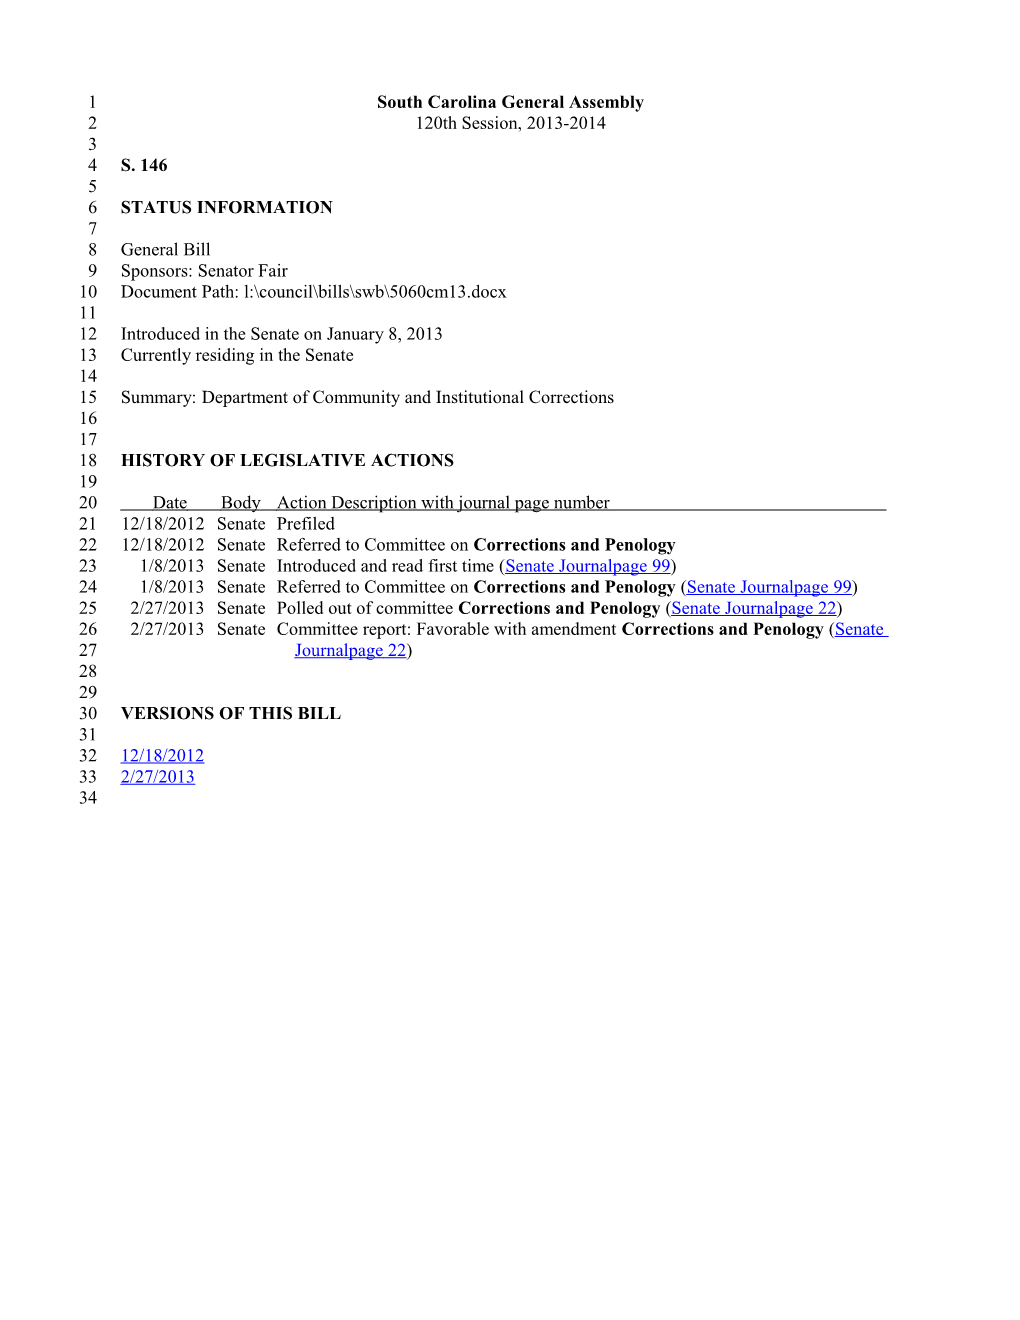 2013-2014 Bill 146: Department of Community and Institutional Corrections - South Carolina